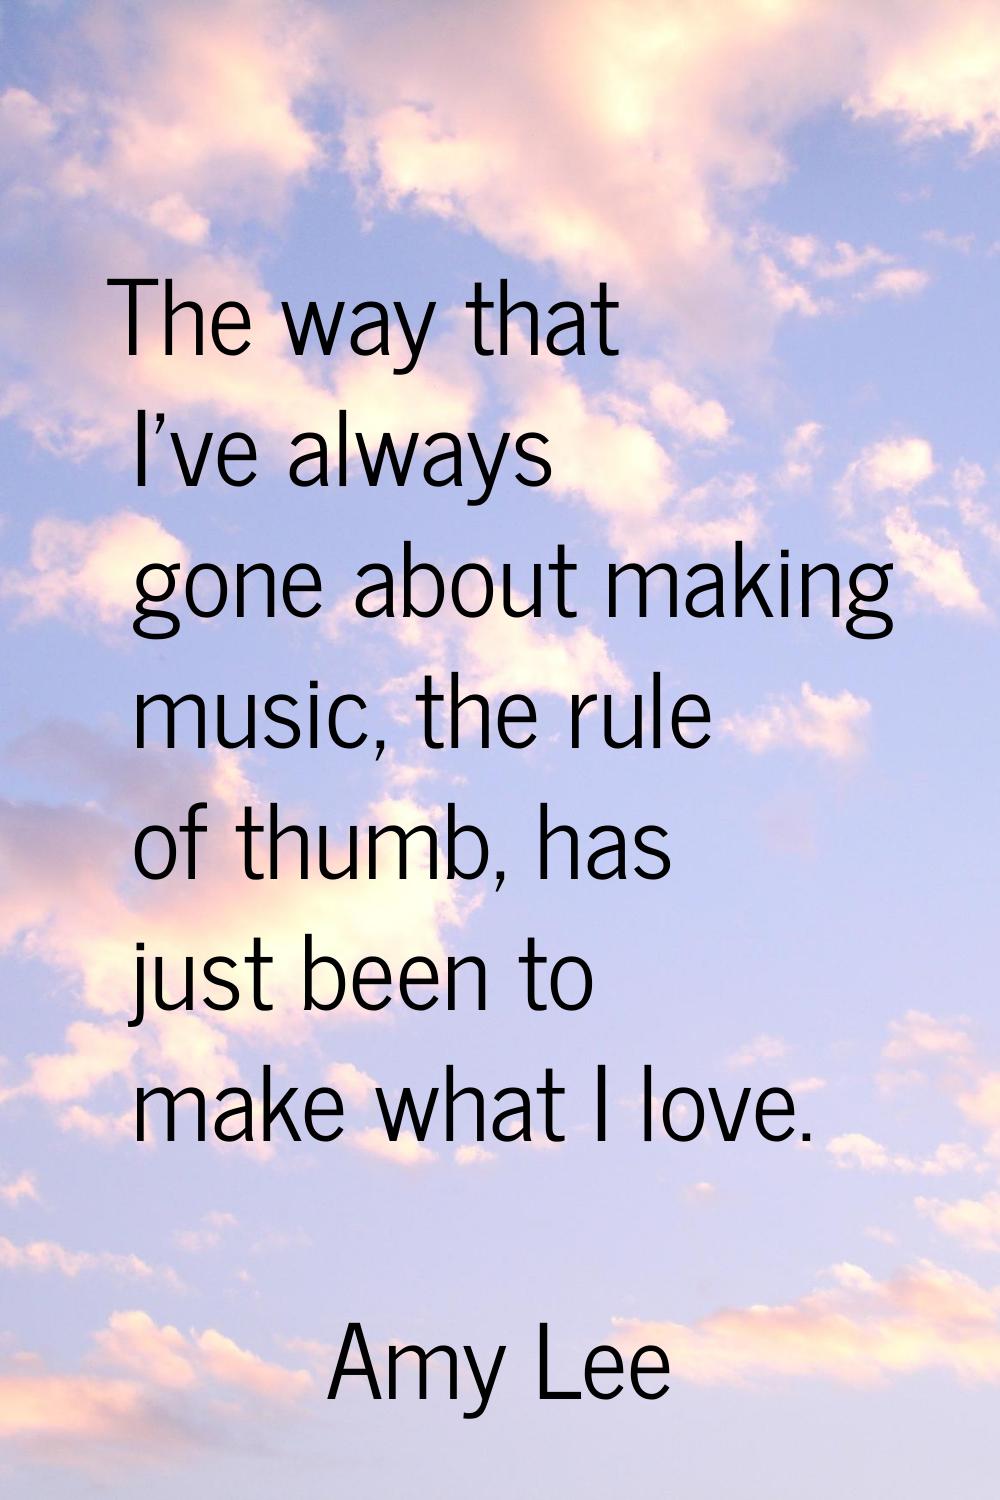 The way that I've always gone about making music, the rule of thumb, has just been to make what I l